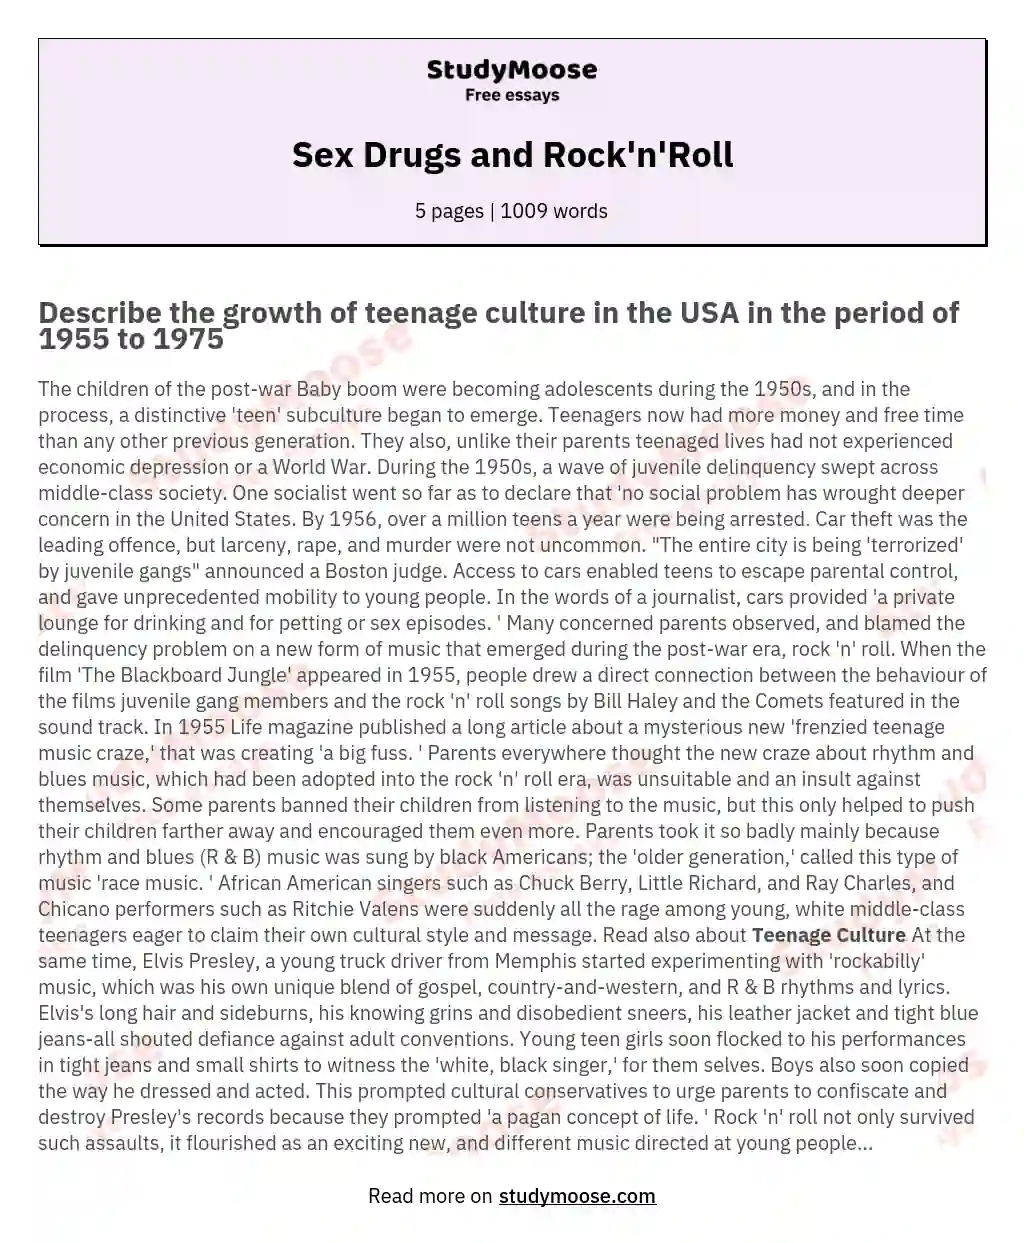 Sex Drugs and Rock'n'Roll essay